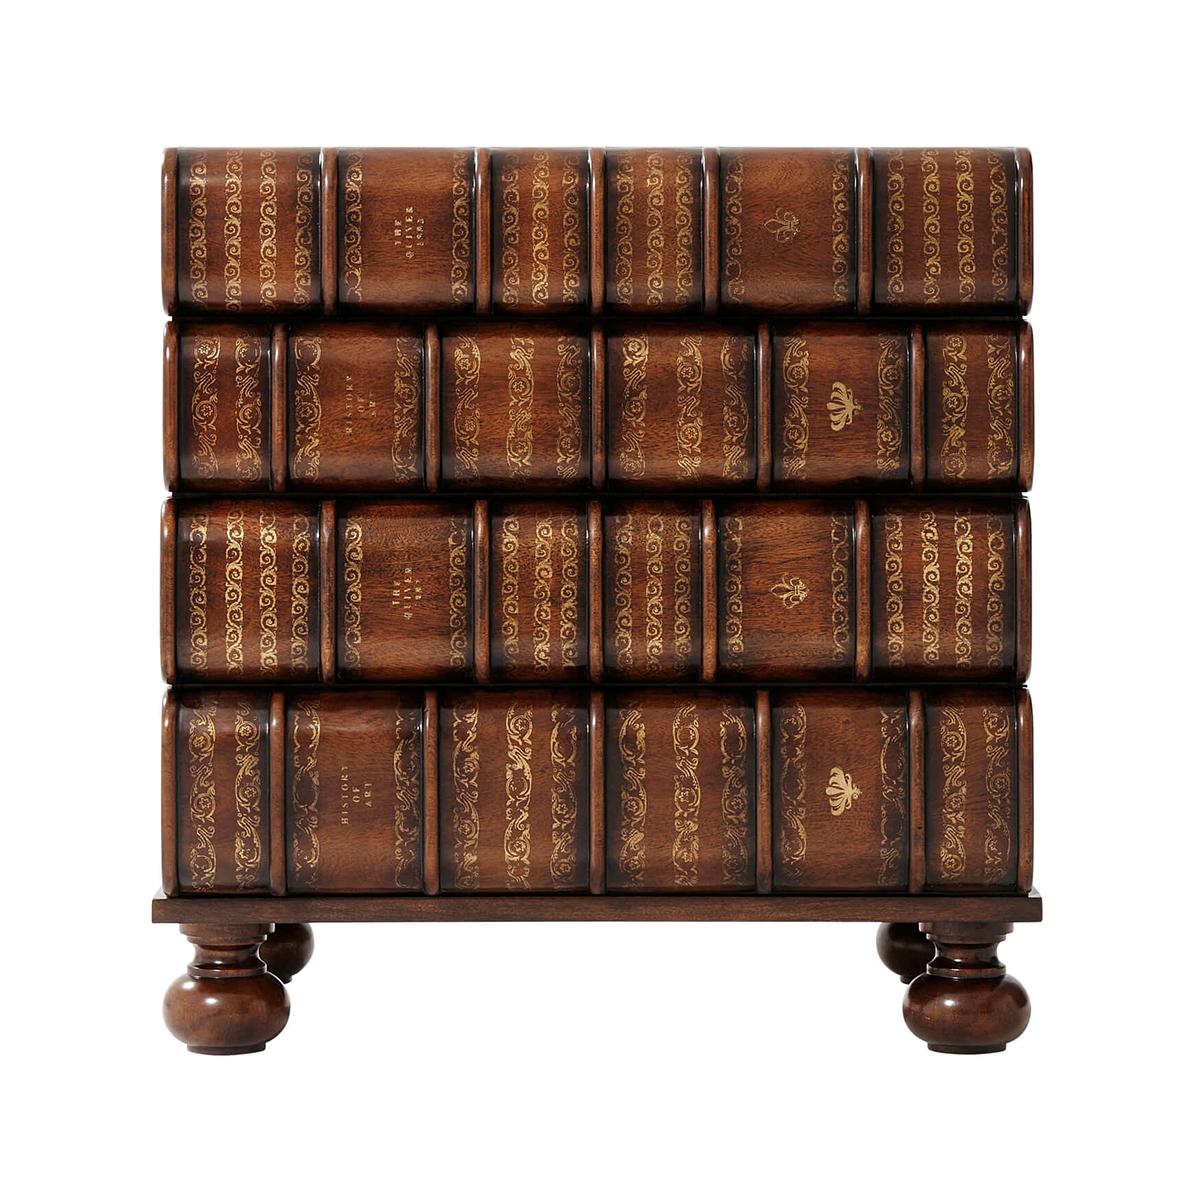 English Faux book nightstand, a hand carved and gilt faux book bedside chest, with four spine front drawers, on bun feet.

Dimensions: 25